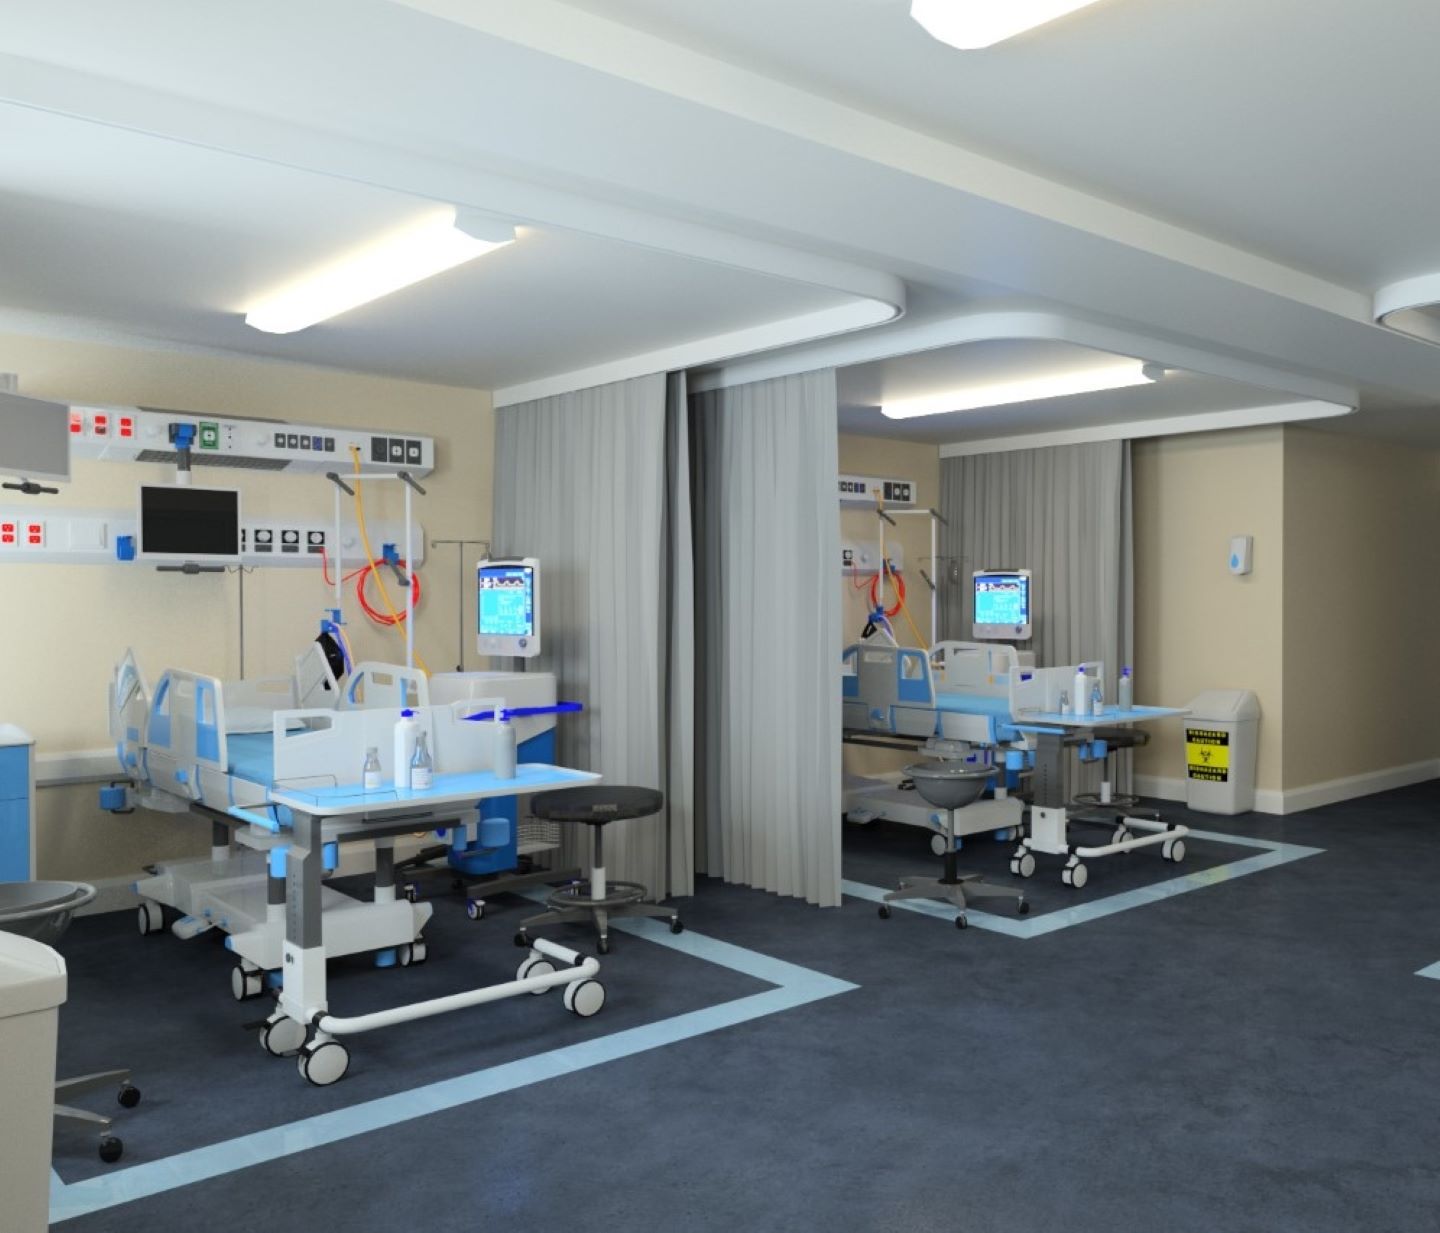 Images showing how the Clinical Skills Unit in the new Healthcare Education Centre at Aberystwyth University will look